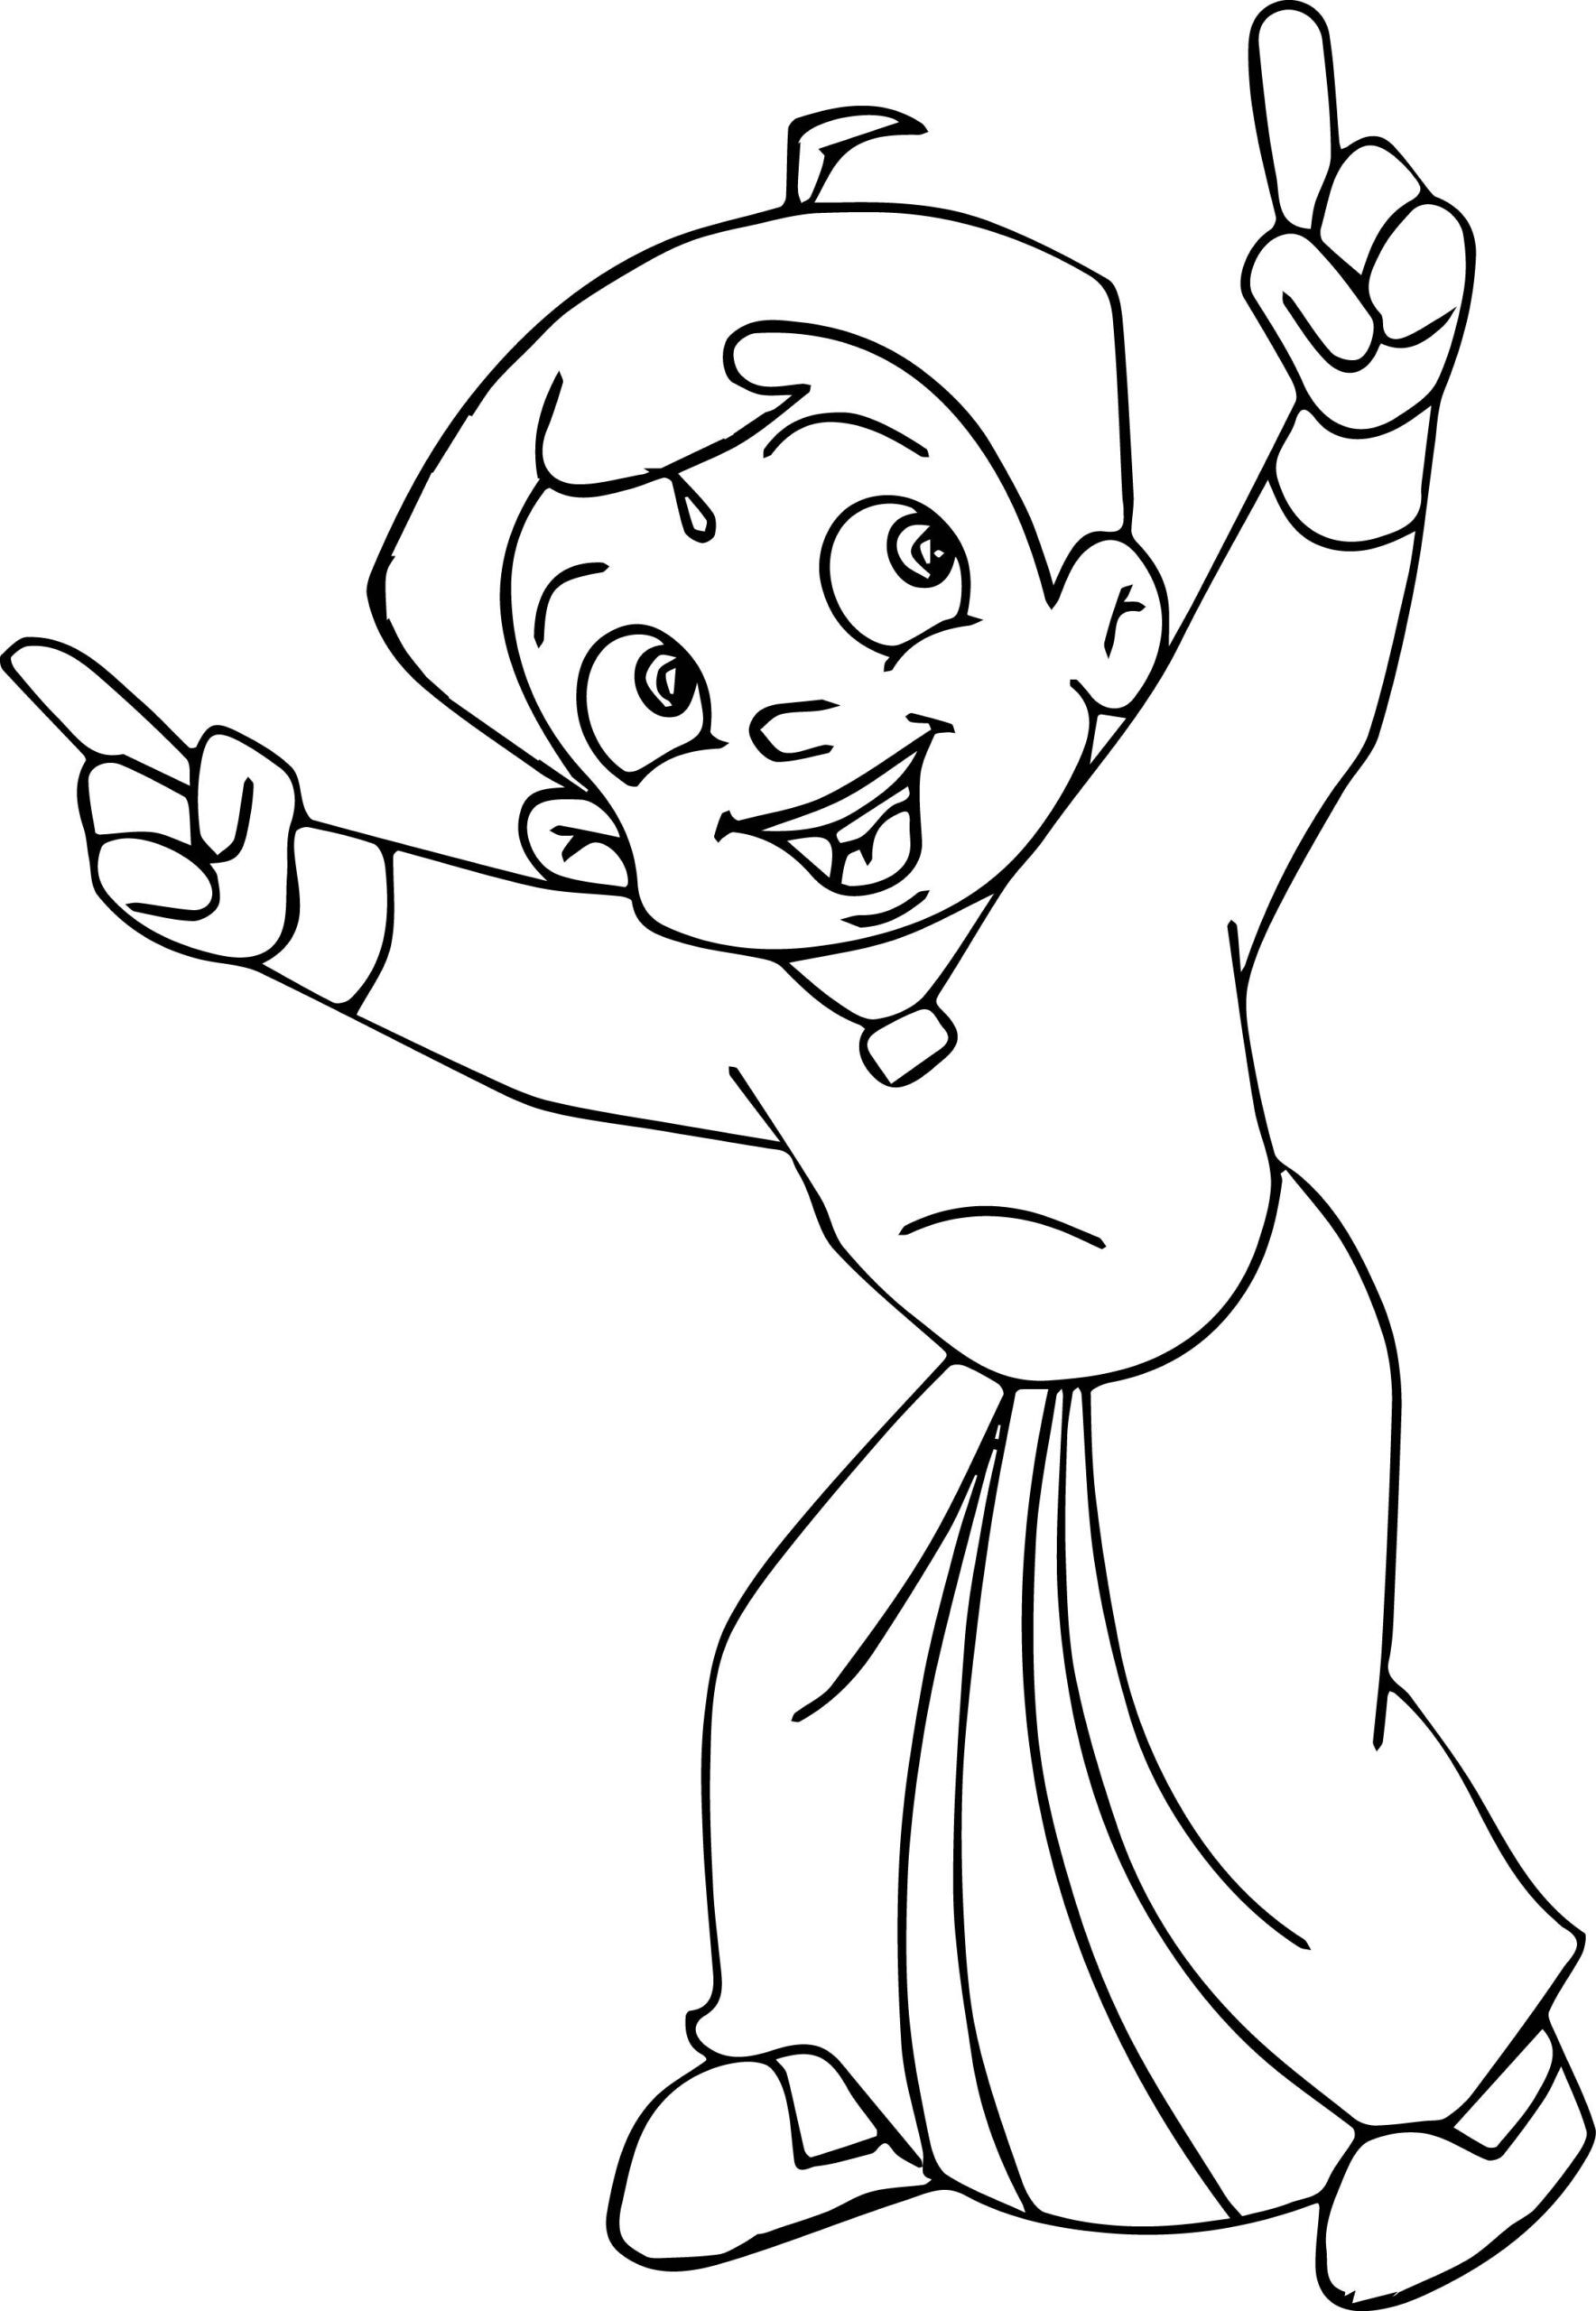 Chhota Bheem Coloring Books Free And Printable Coraline Coloring Pages  Coloring page anime colouring dolphin coloring sheet kids learning colors  science projects for preschoolers english games for kids Be smart people